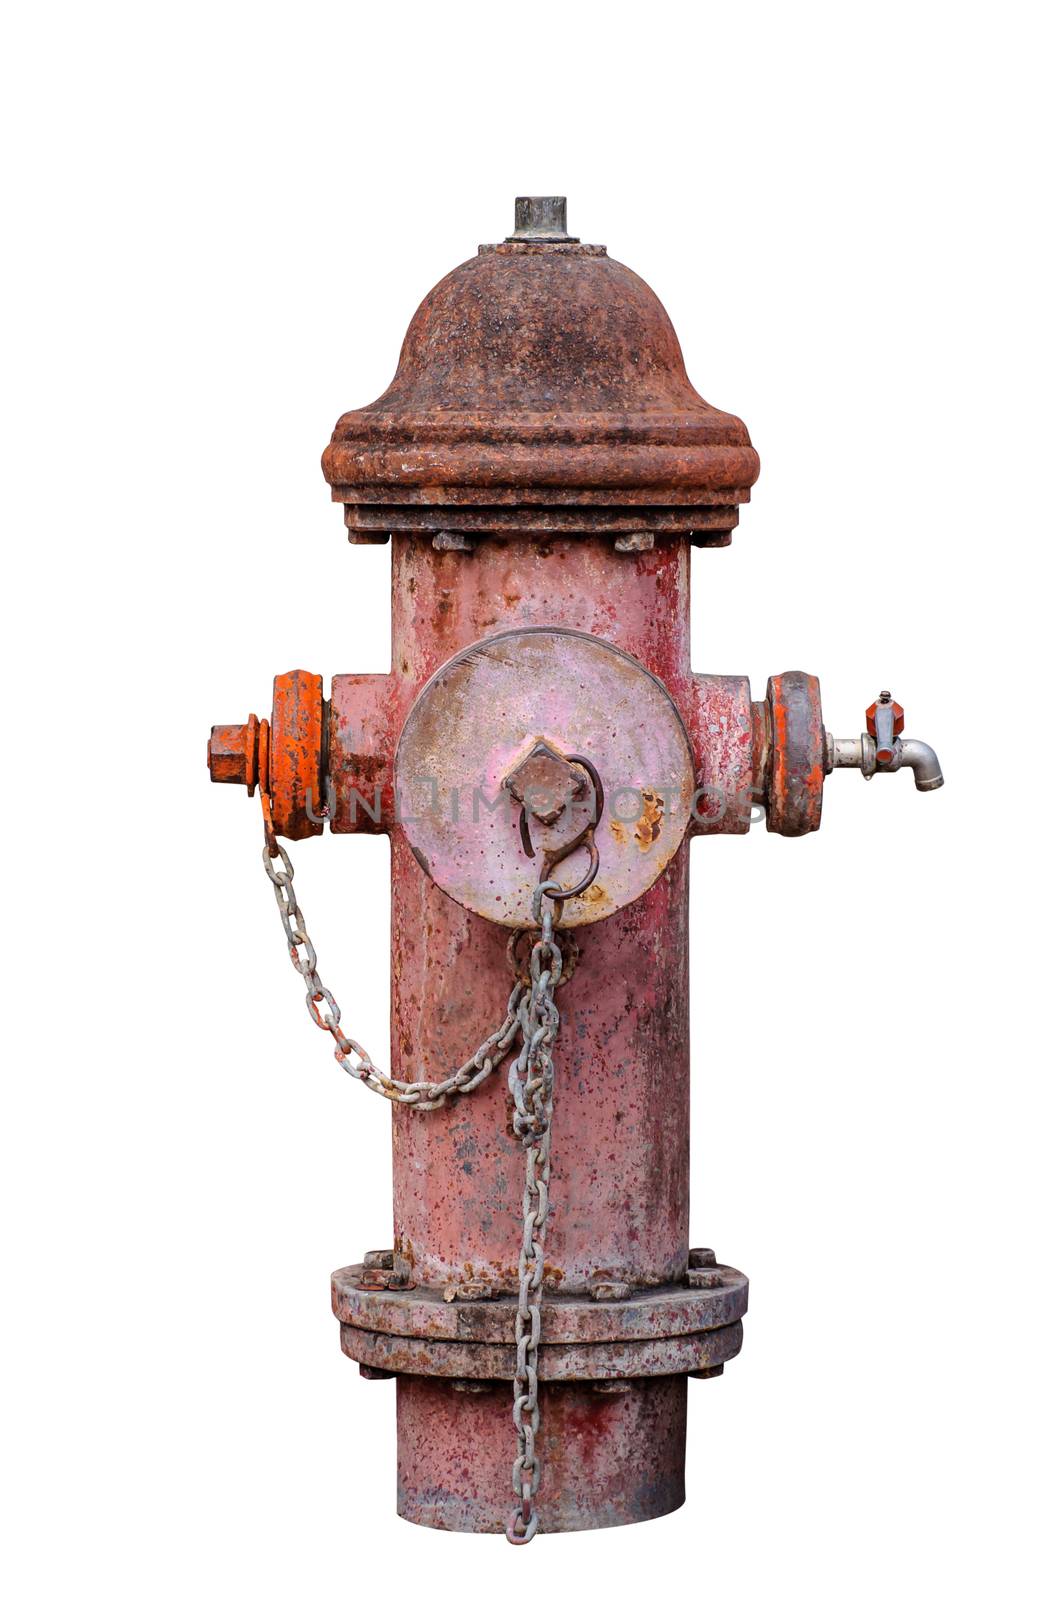 Old red fire hydrant isolated on white background